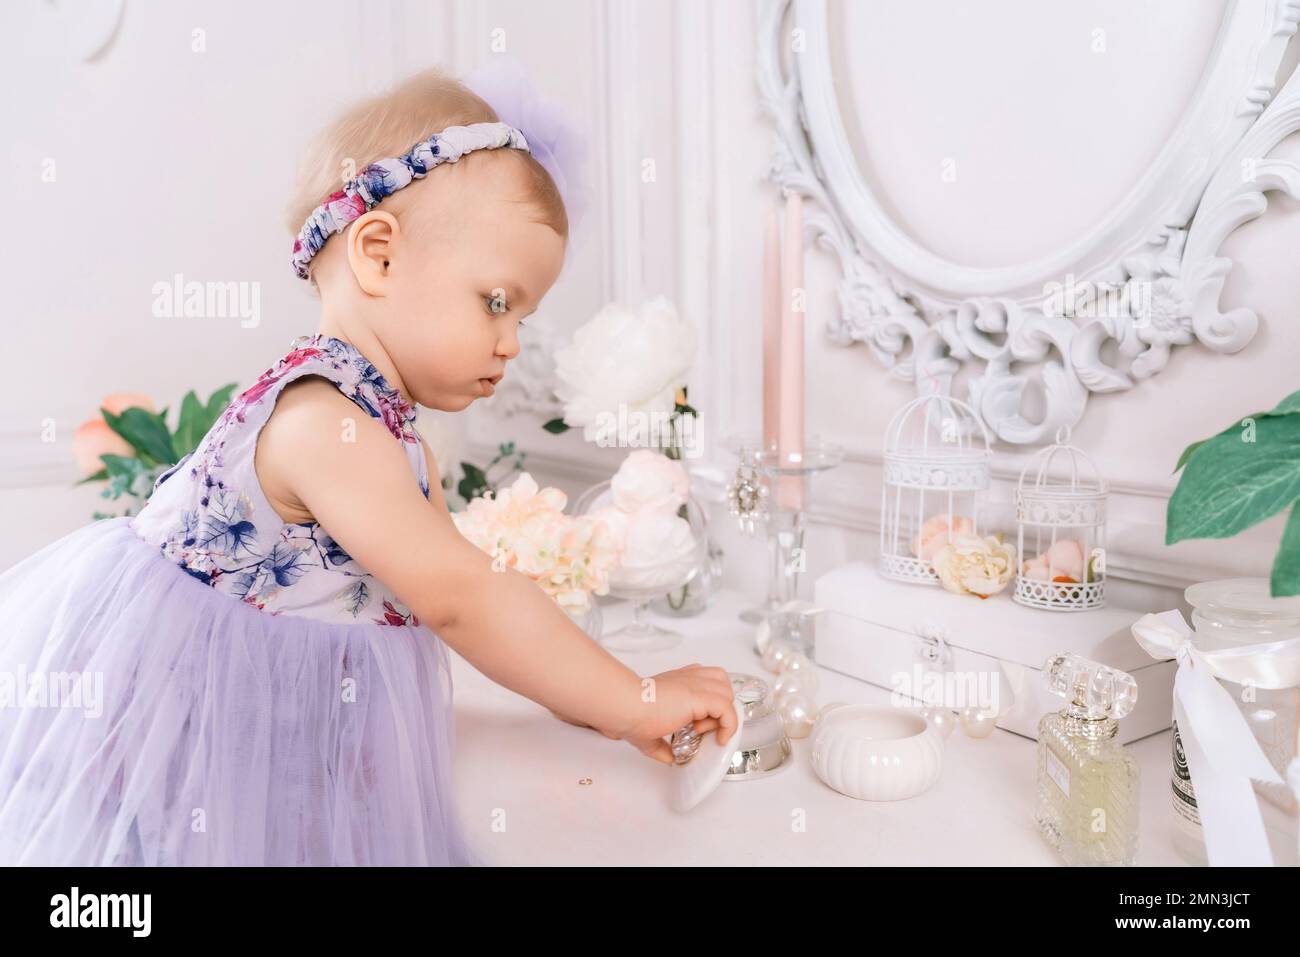 Baby girl elegant dress. A one-year-old girl in a puffy dress and a cute bow poses against the backdrop of a bright room with a dressing table and Stock Photo